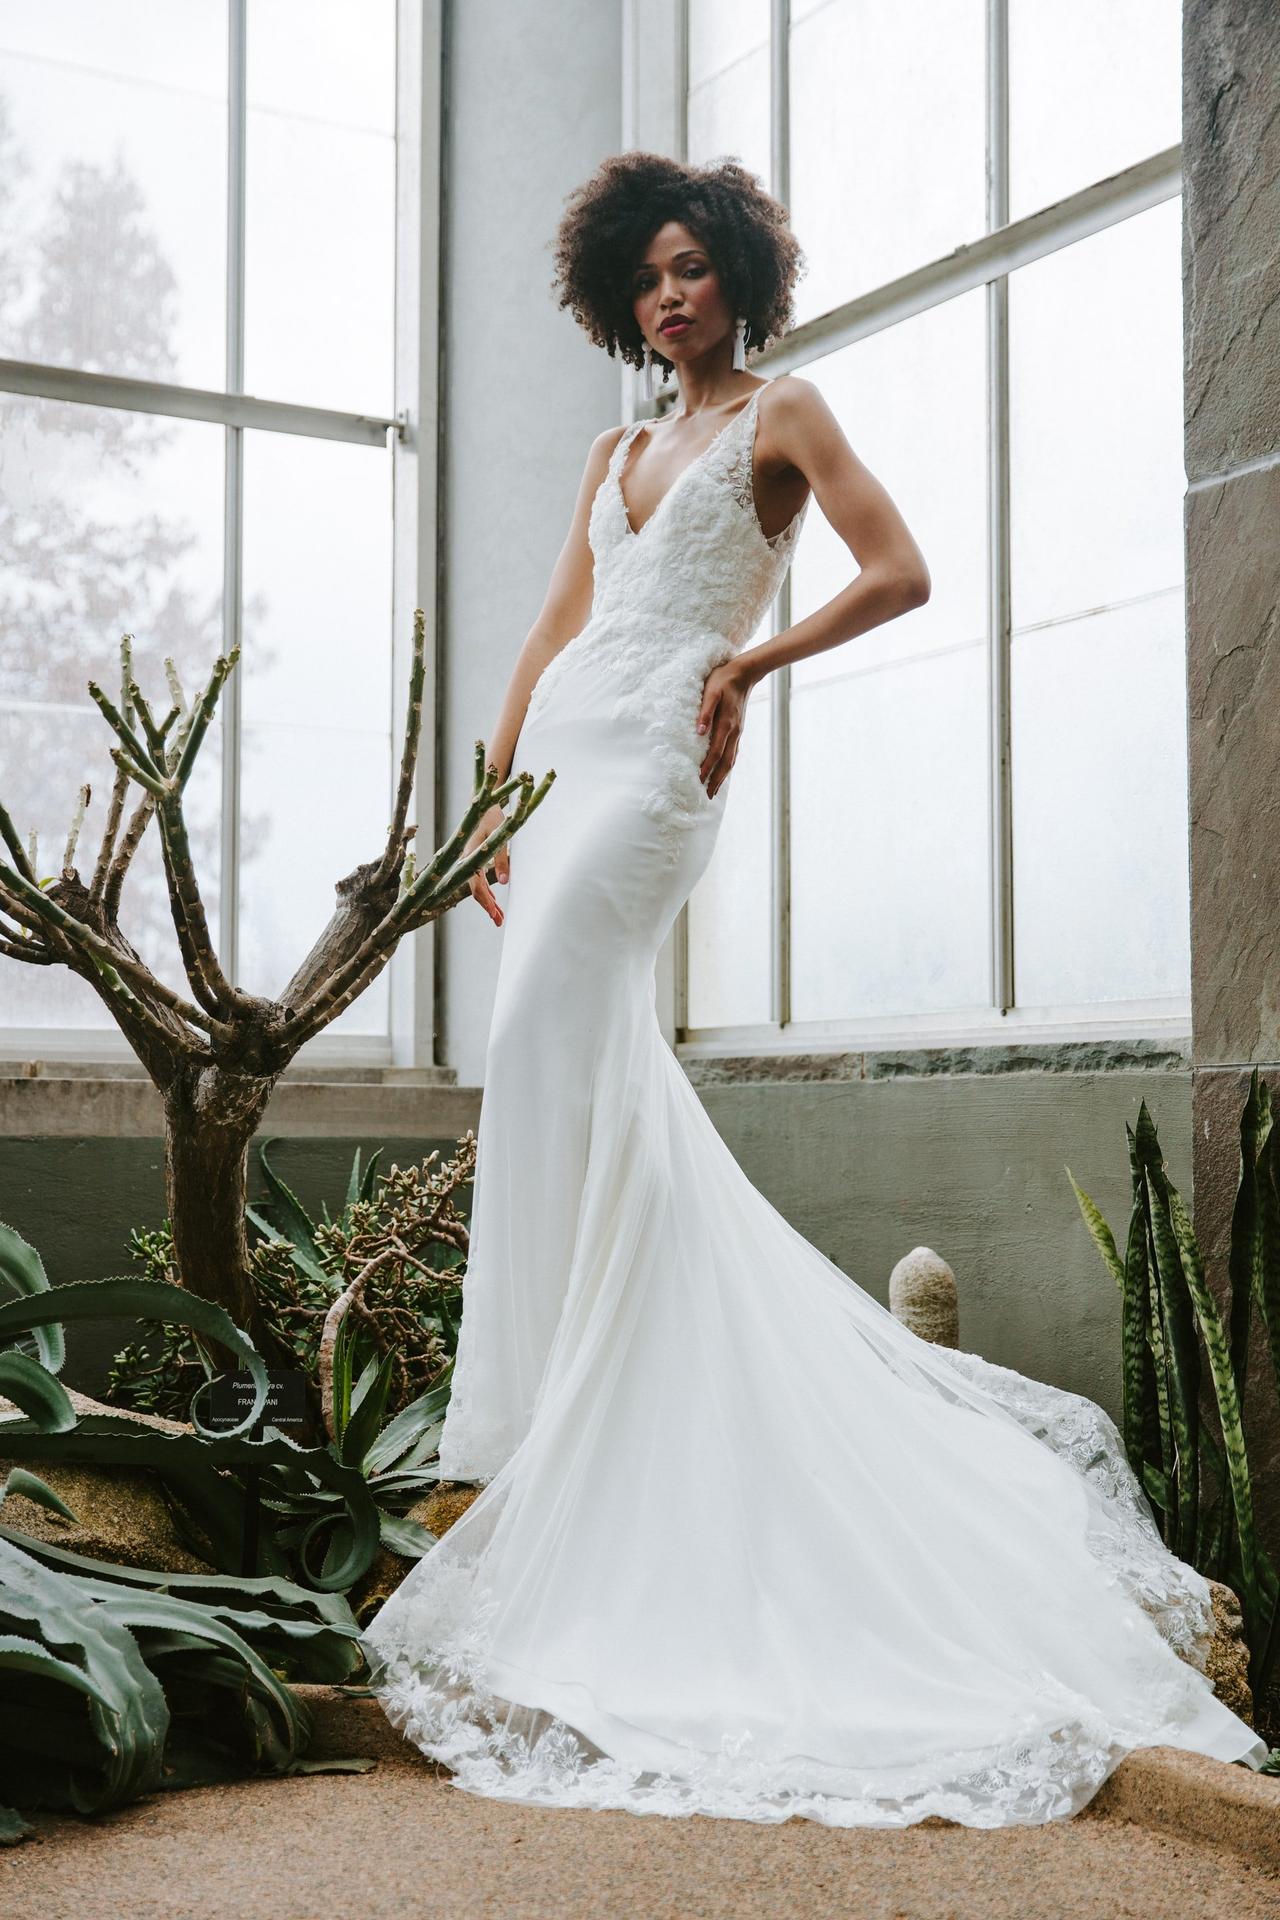 All you need to know about wedding dress alteration